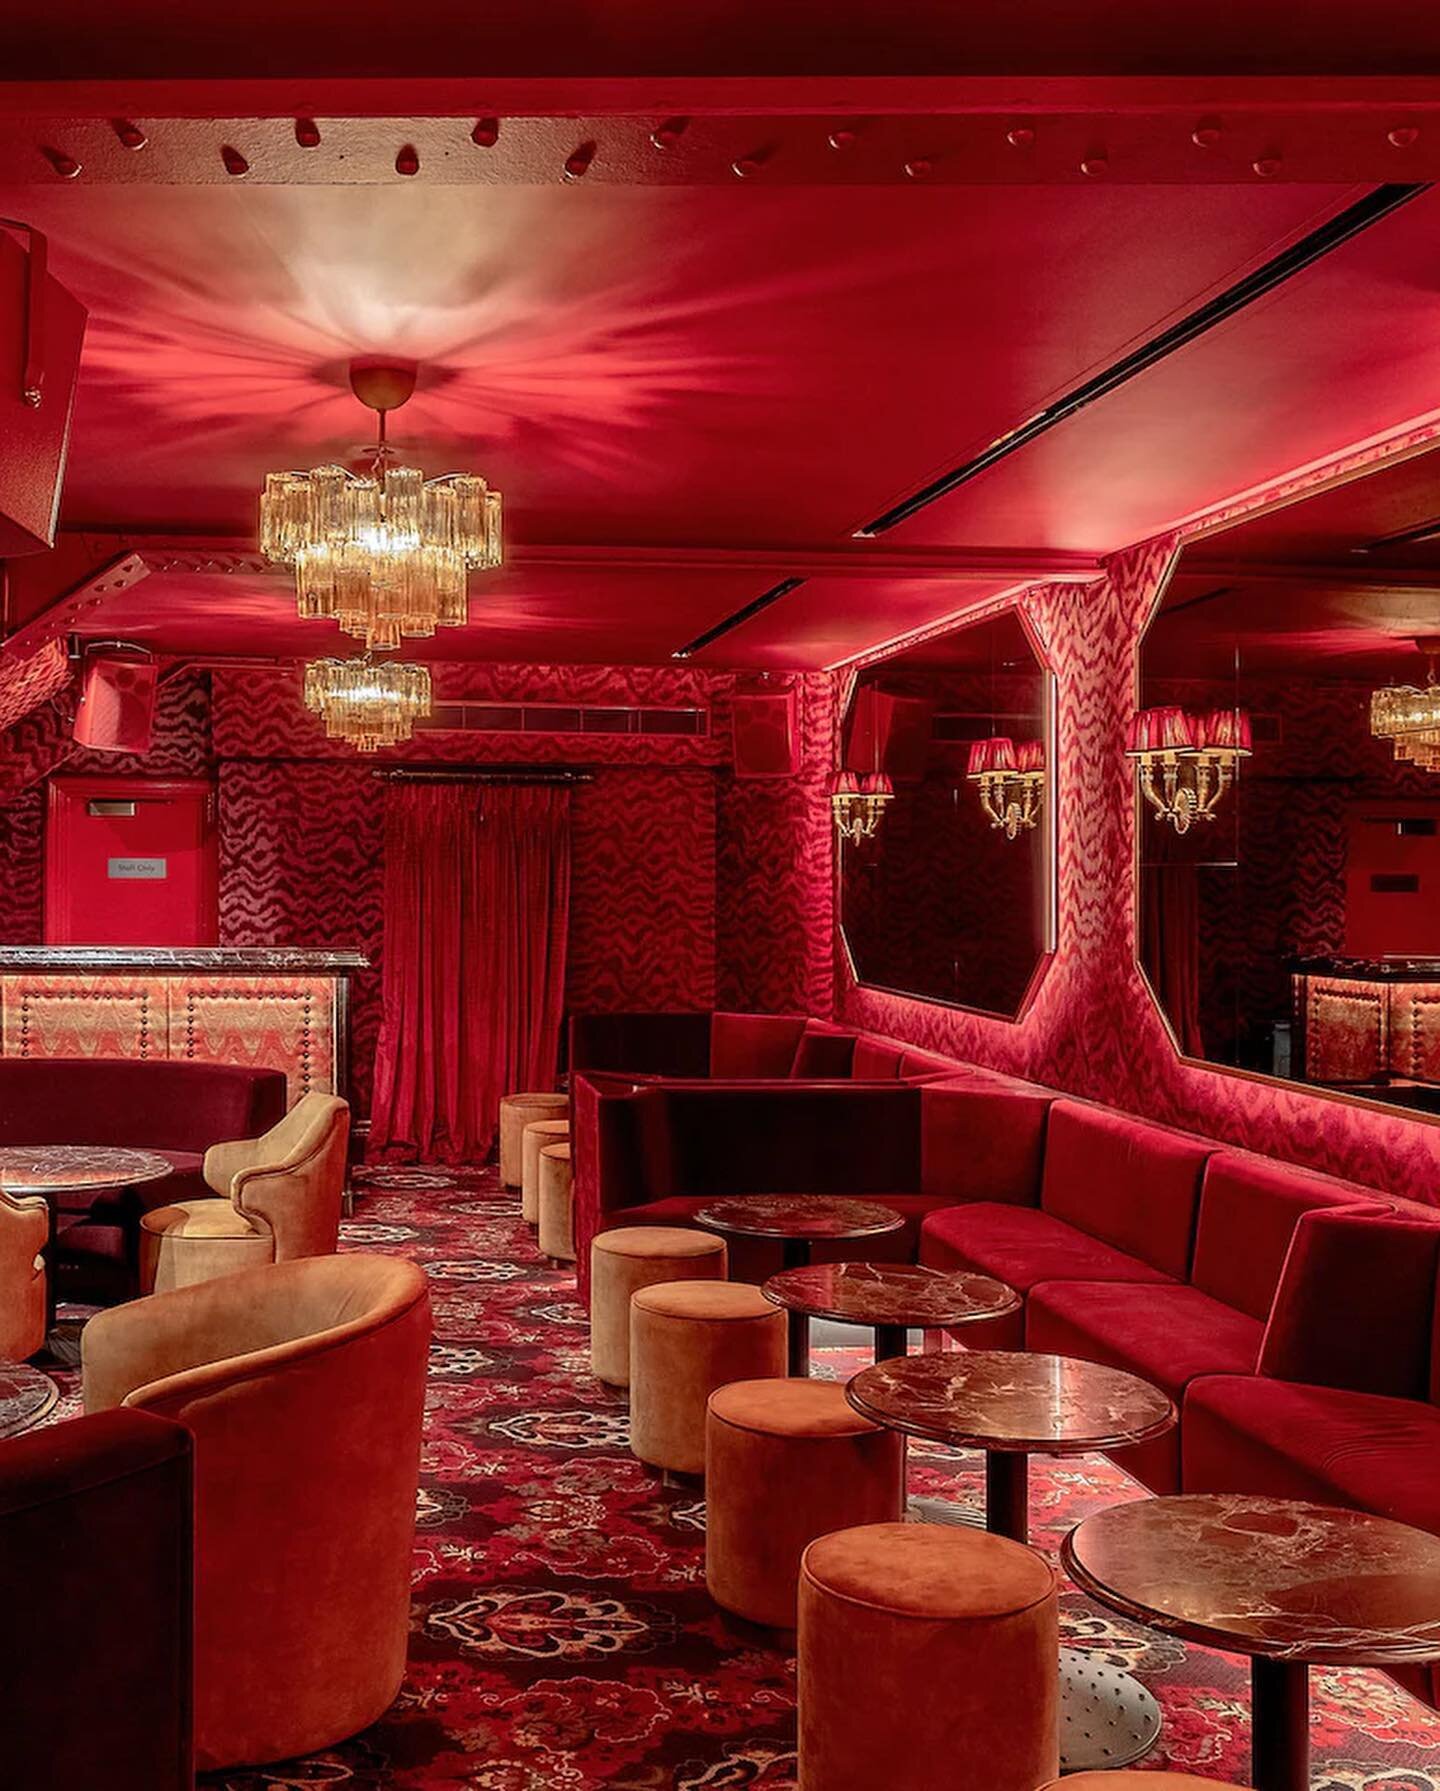 Commercial Project // Fabric walling for @kokocamden in their VIP Lounge ✨

A very challenging room with lots of beams and pitched angles that we had to take the fabric around. Walls were covered in a red velvet which I found from @prestigioustextile